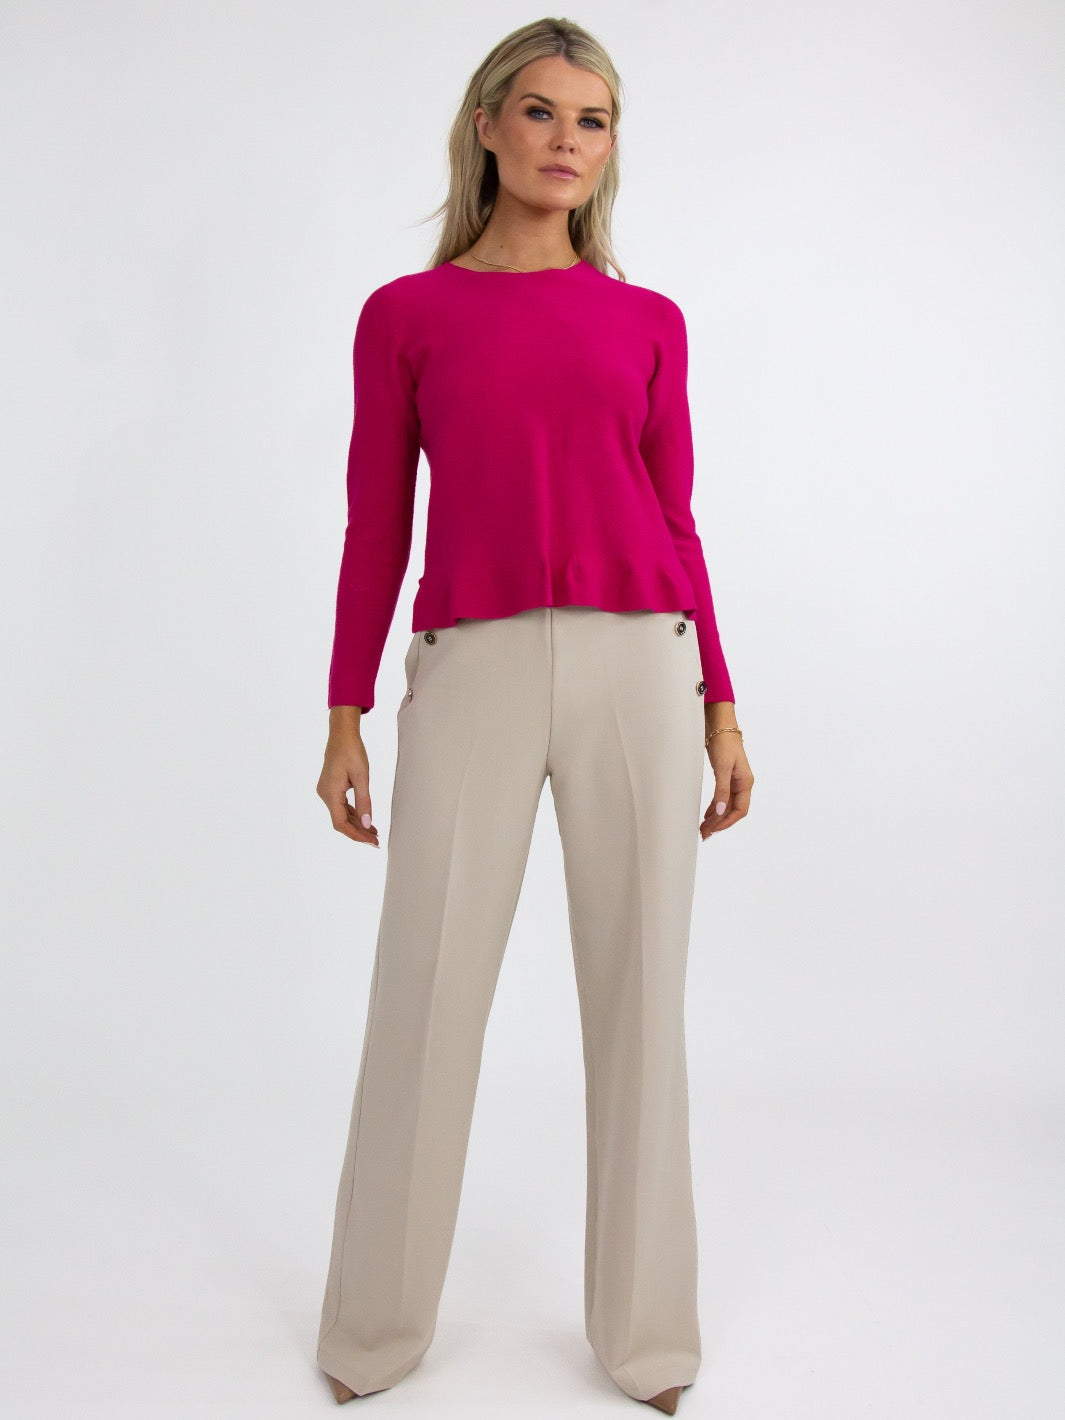 Kate & Pippa Sardinia Button Trousers In Butter-Nicola Ross